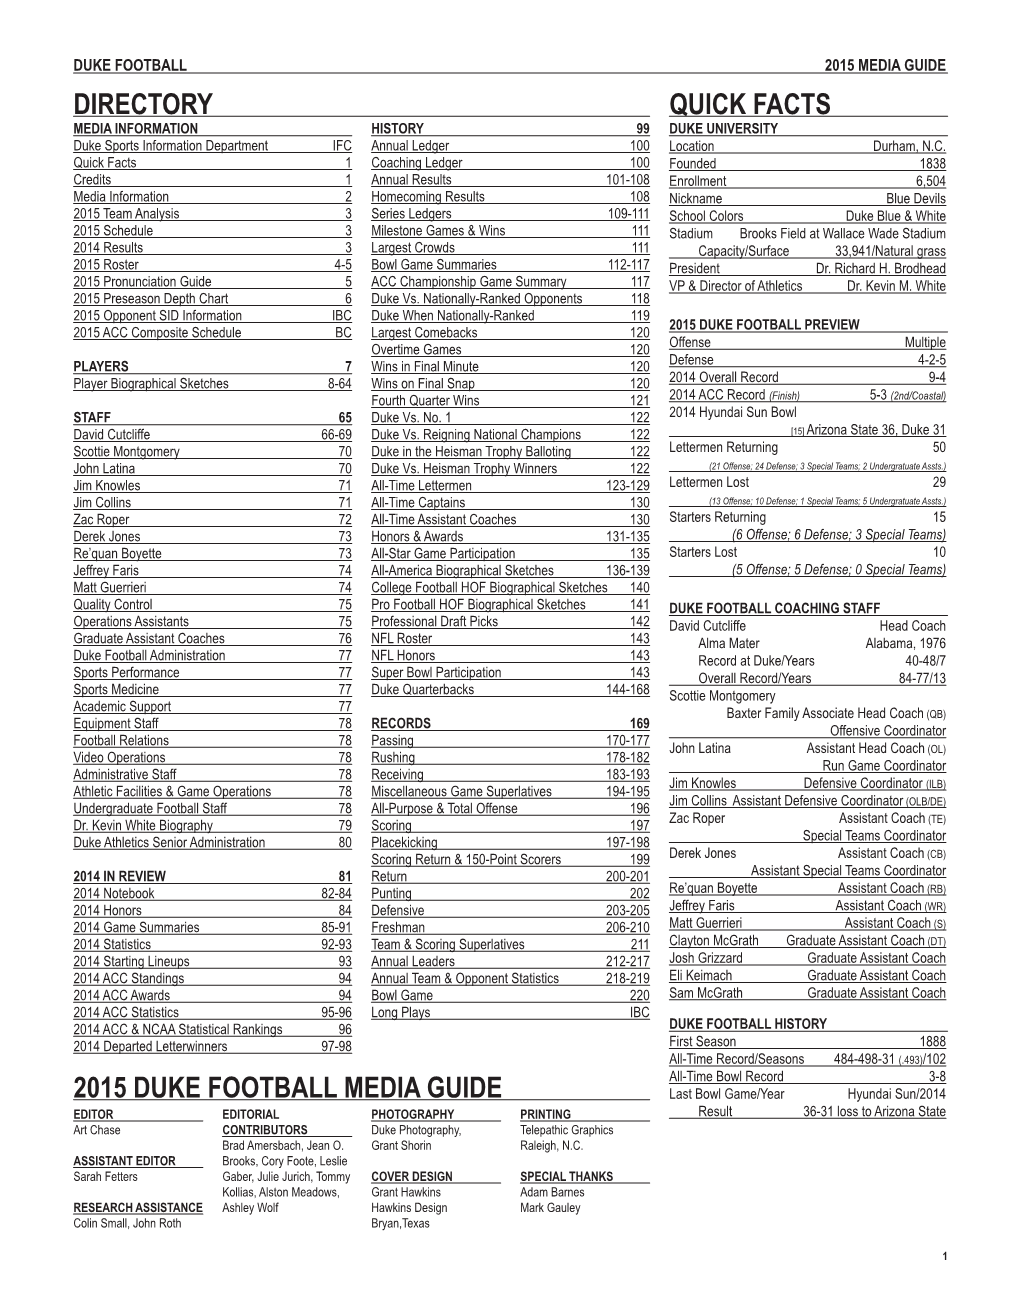 Directory 2015 Duke Football Media Guide Quick Facts